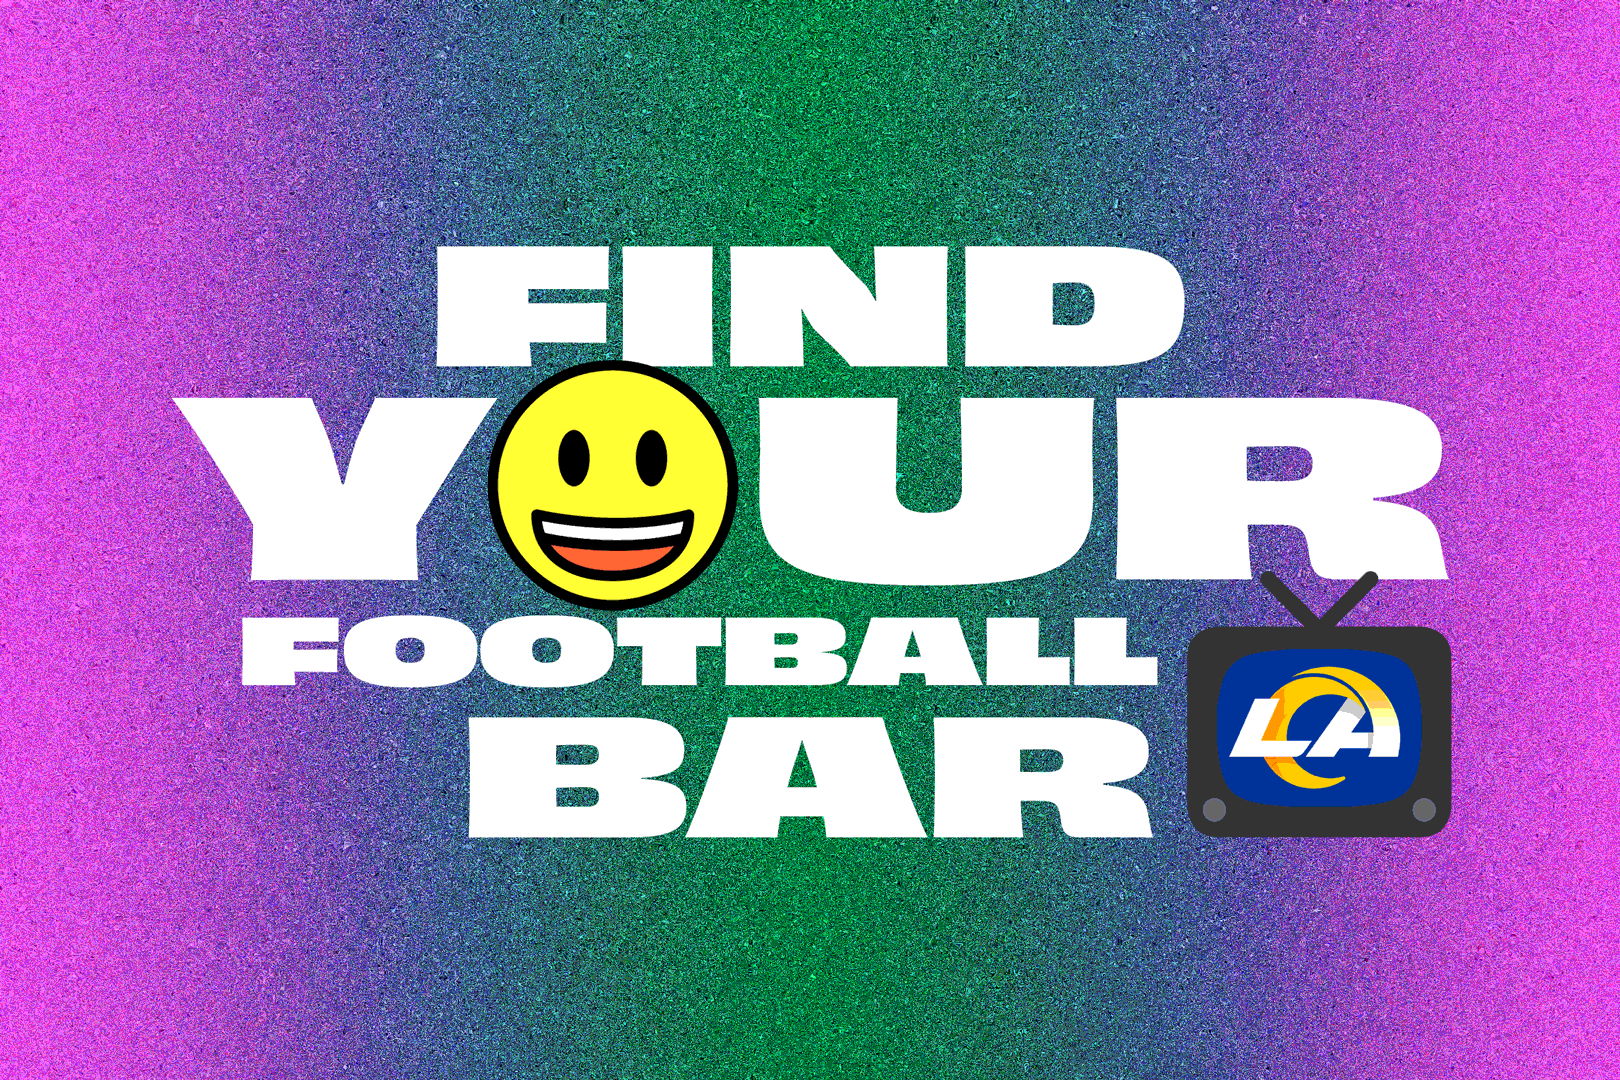 Use our football sports guide to find a bar showing your NFL team every game day.